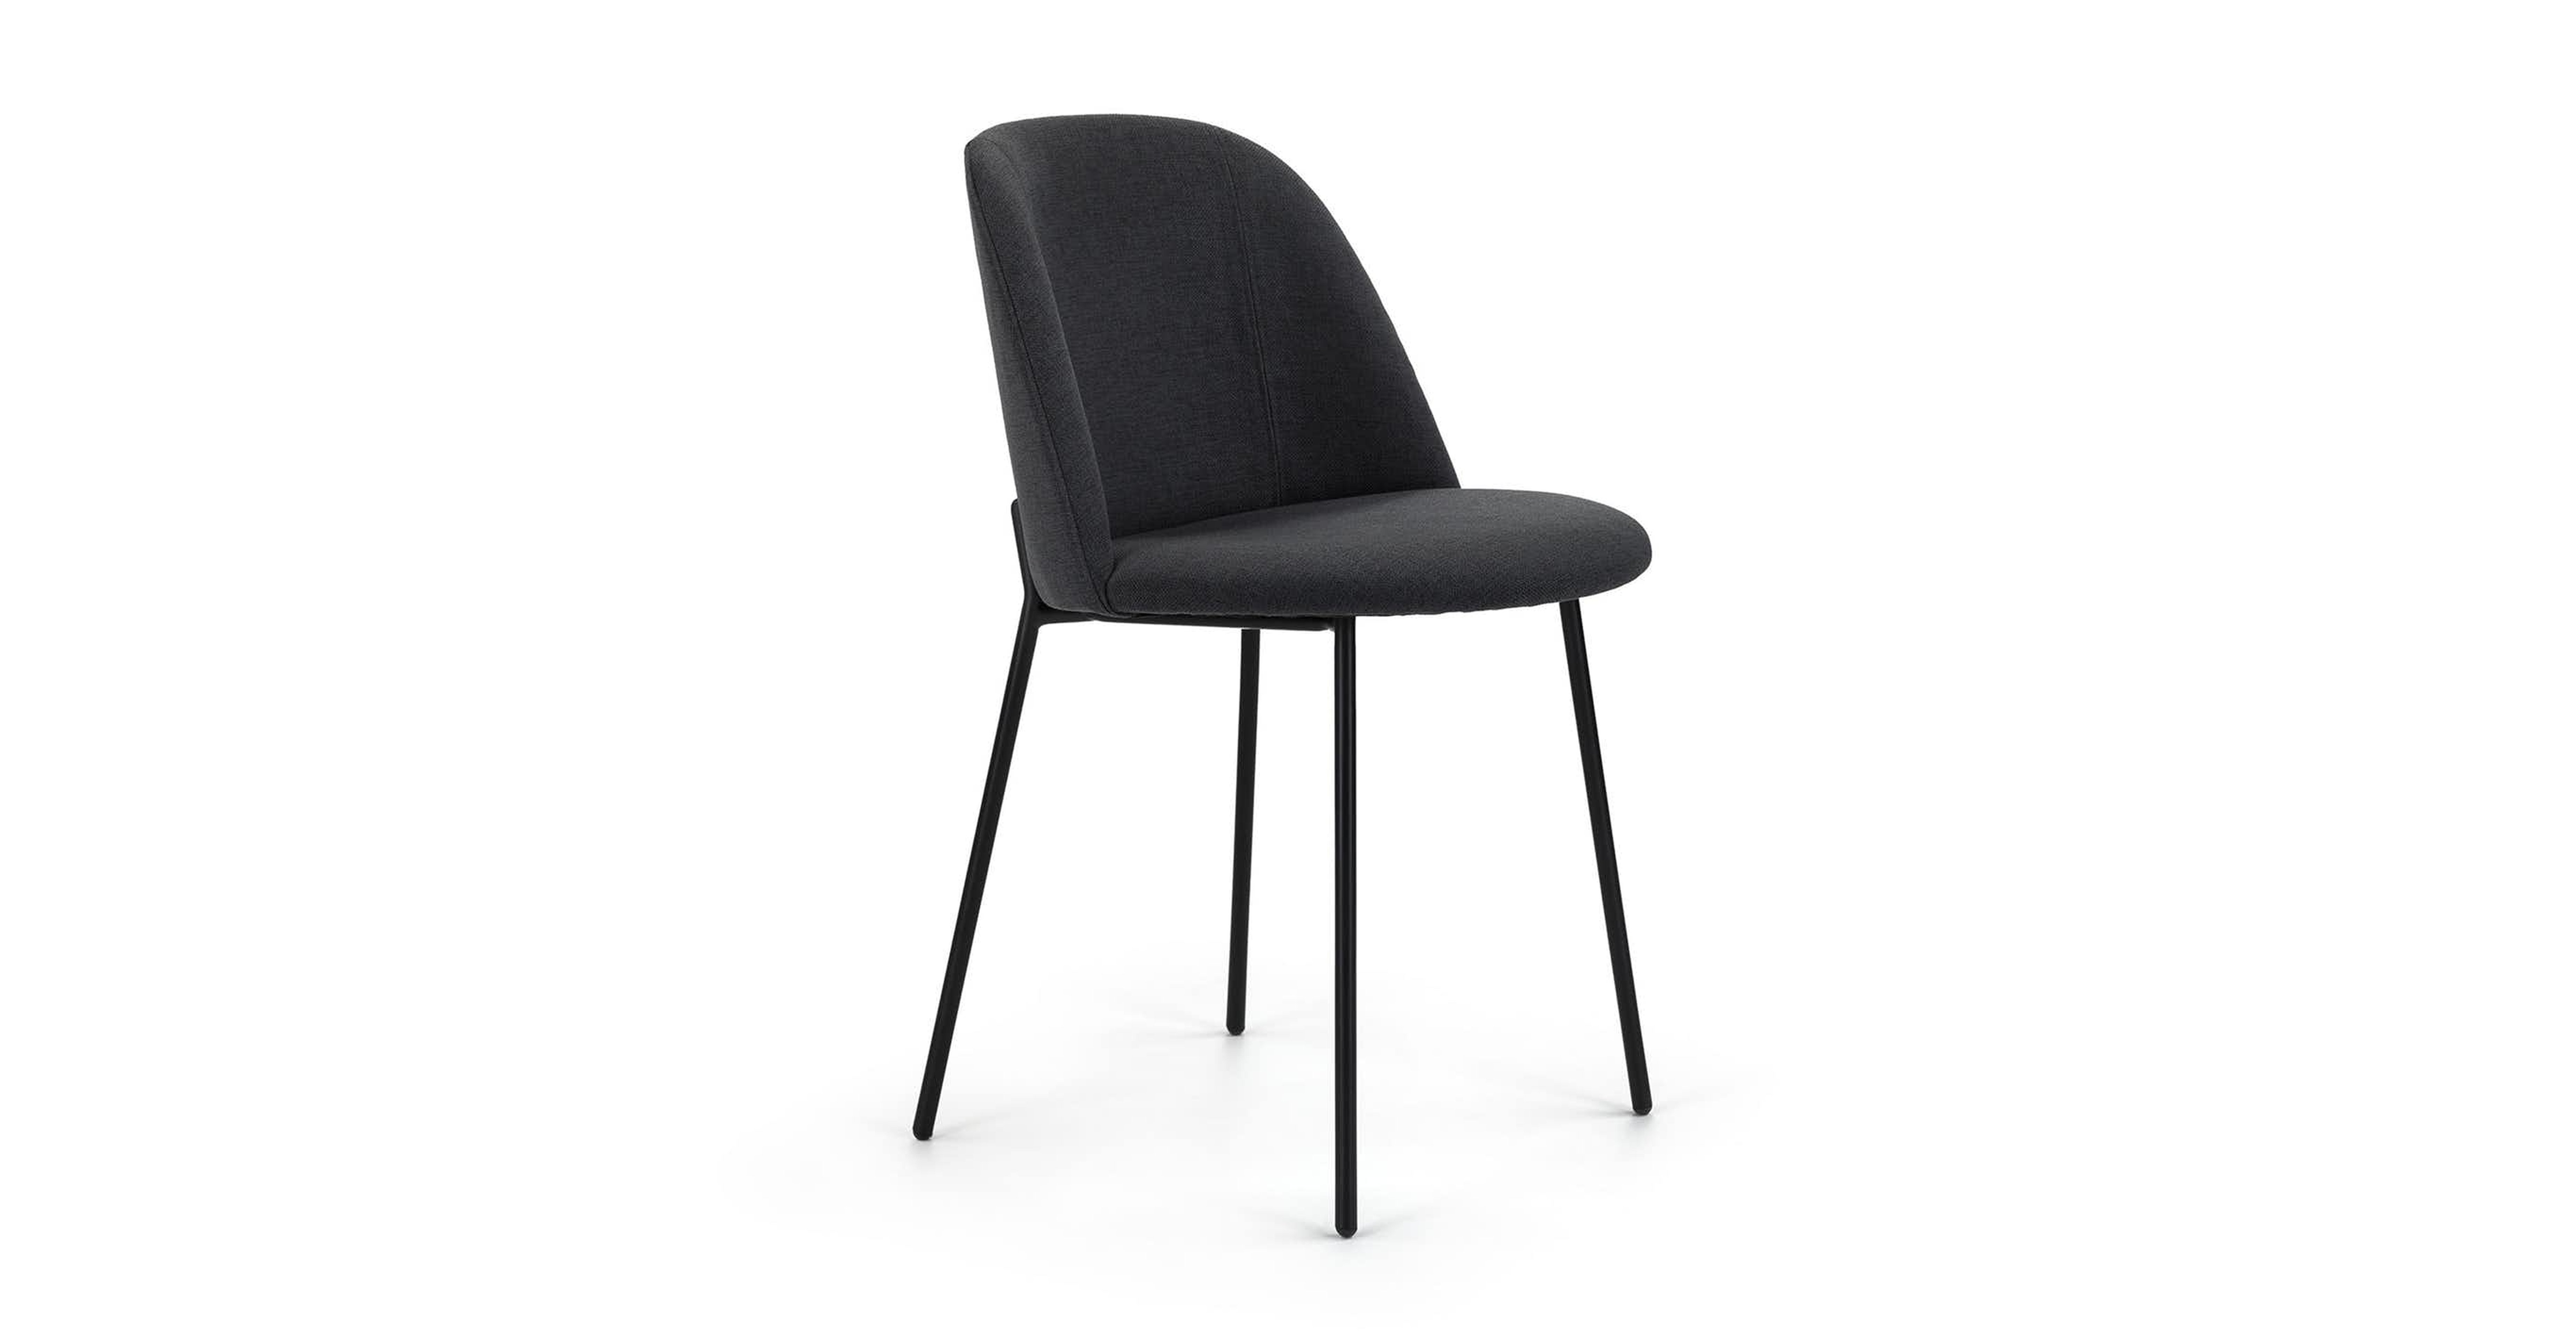 ceres flint gray and black dining chair - Article